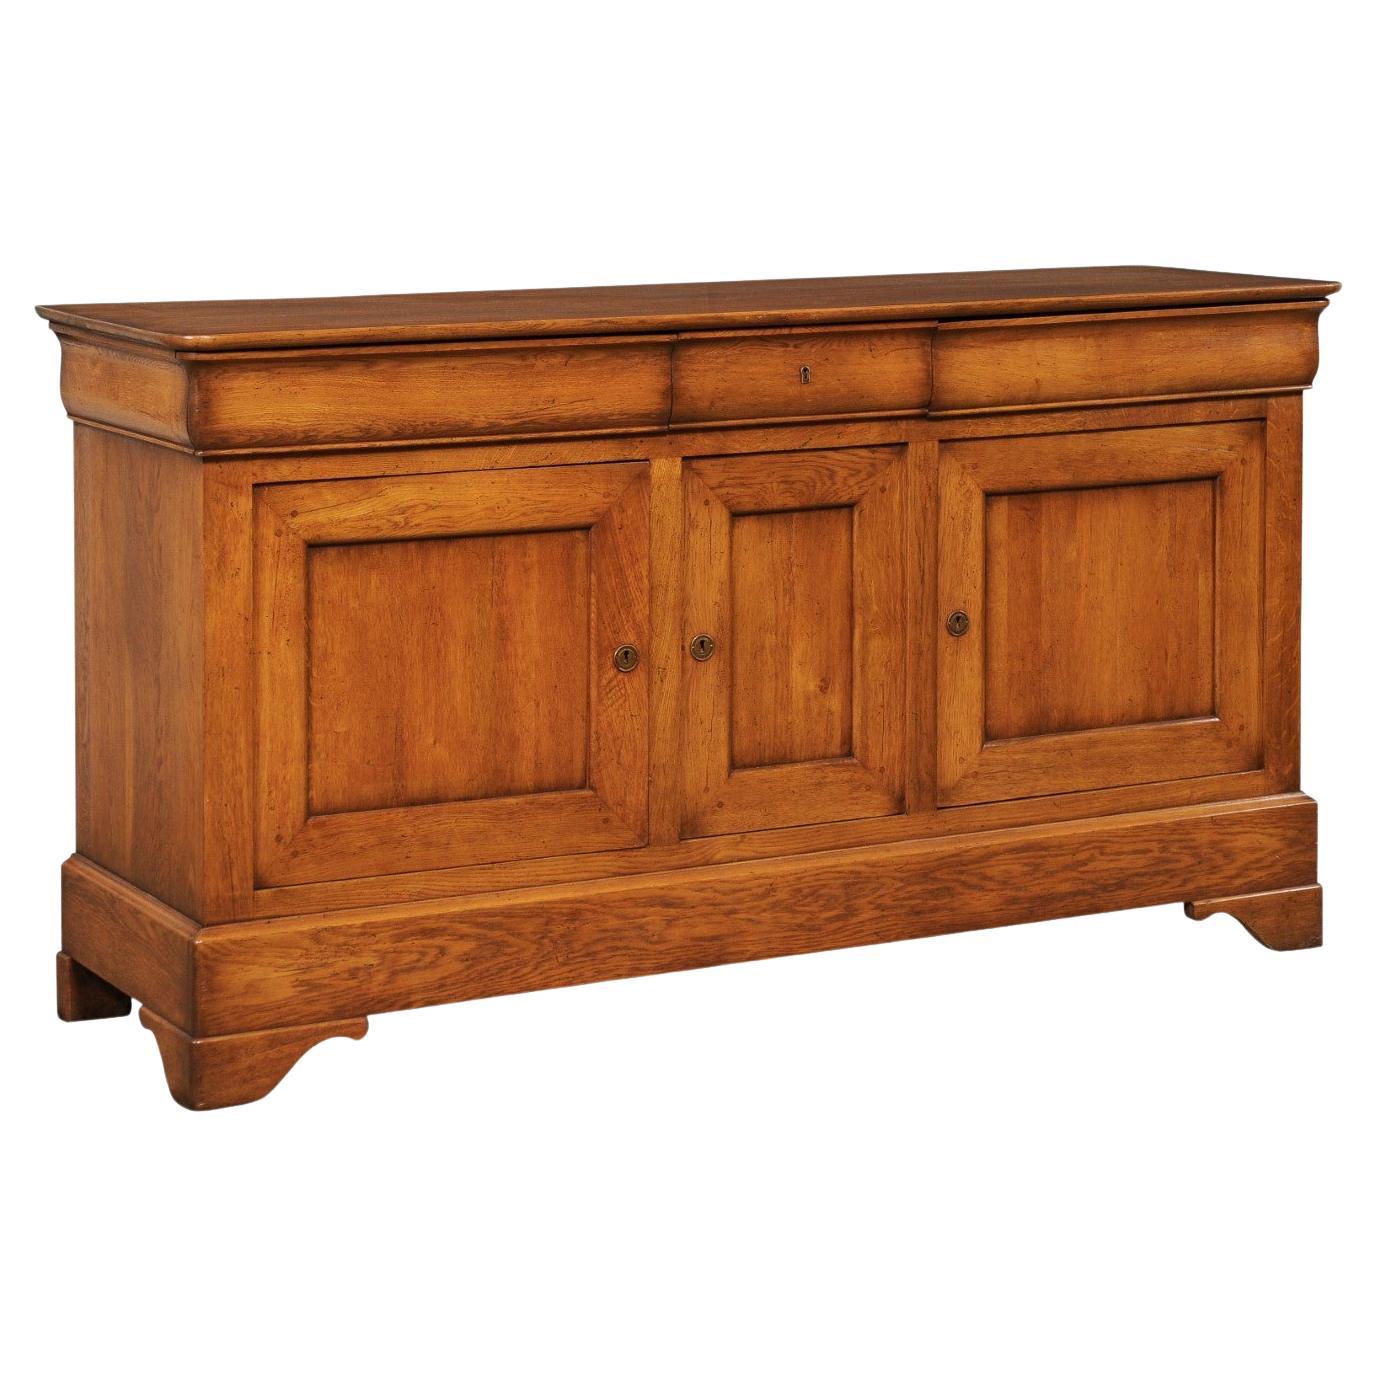 French Mid-20th C. Fruitwood Buffet Console Cabinet